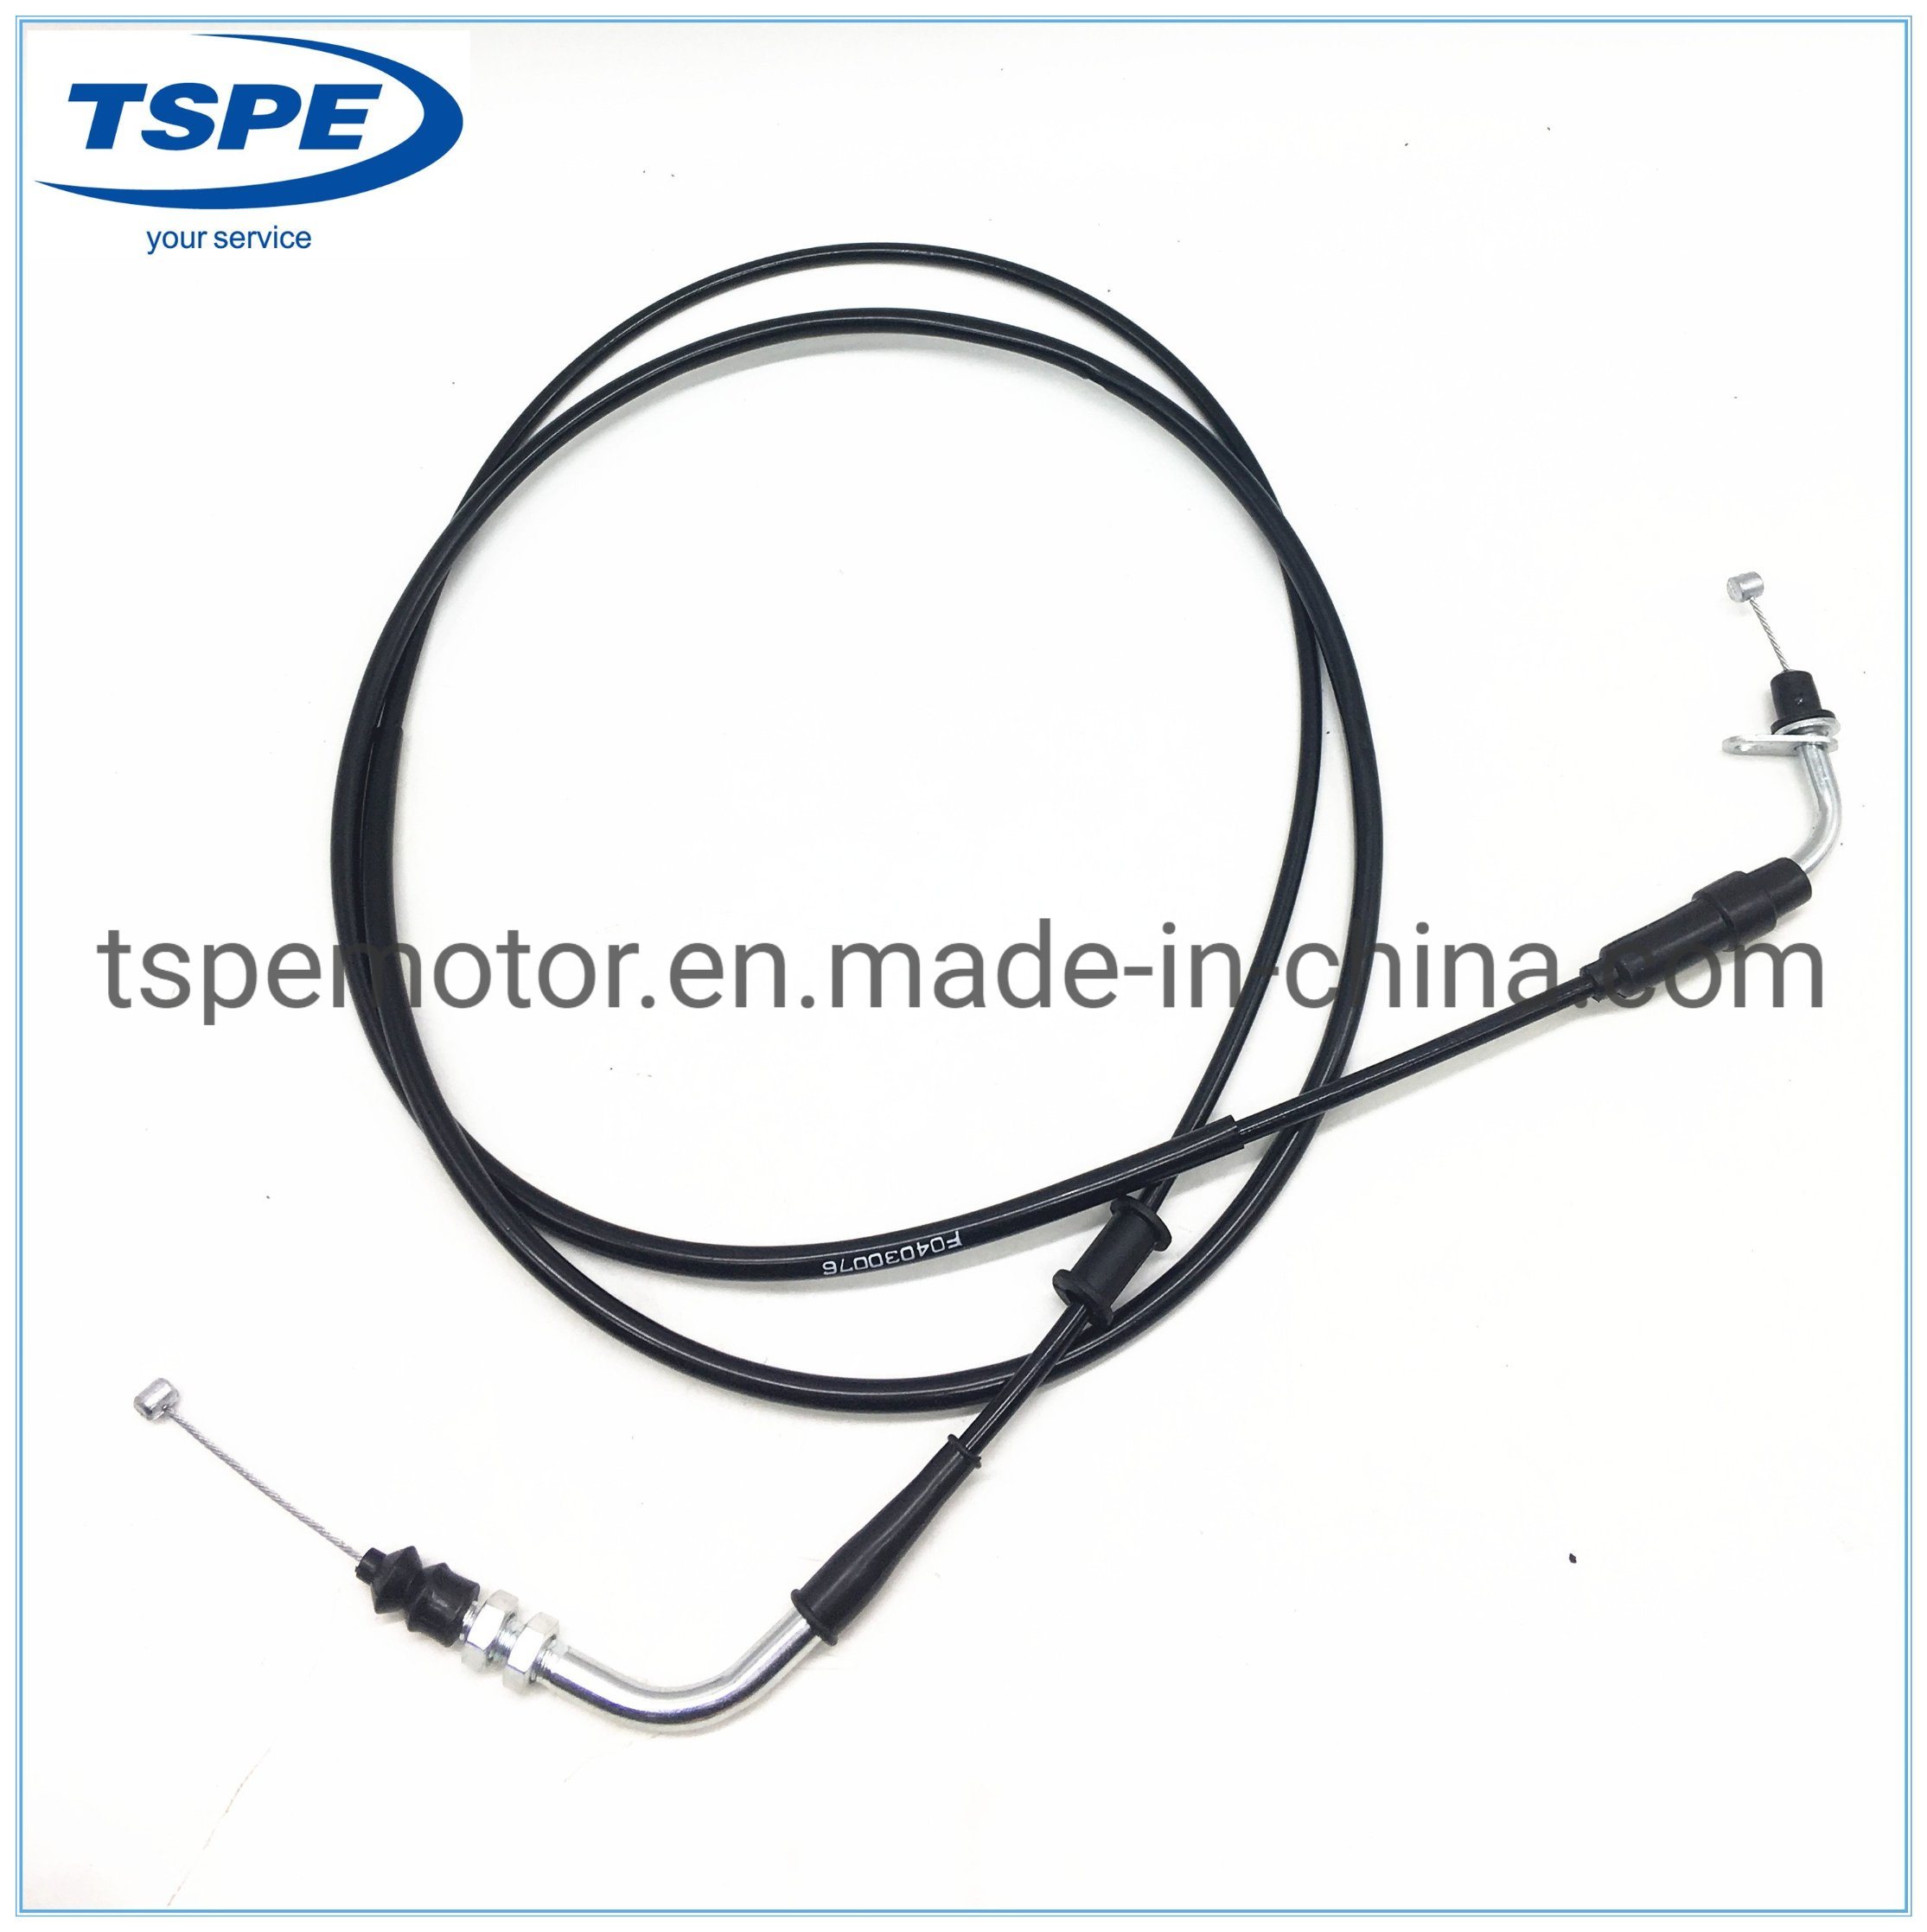 Motorcycle Parts Motorcycle Throttle Cable for Ws-150 Italika